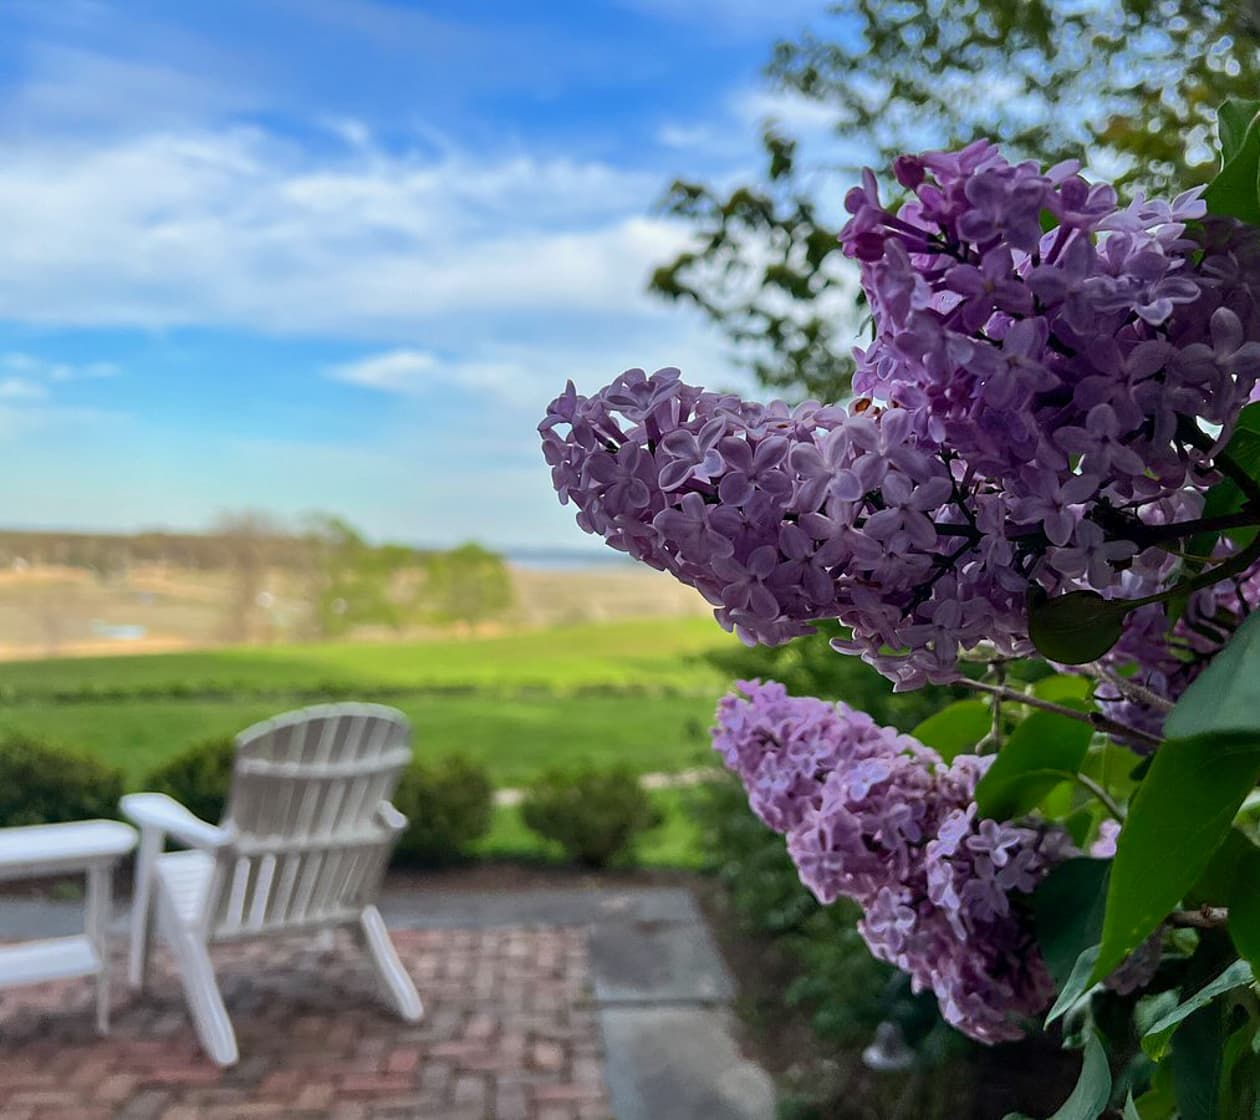 Chairs in the garden and a view of the coast and lilacs blooming in the foreground at hotel in Ipswich, MA